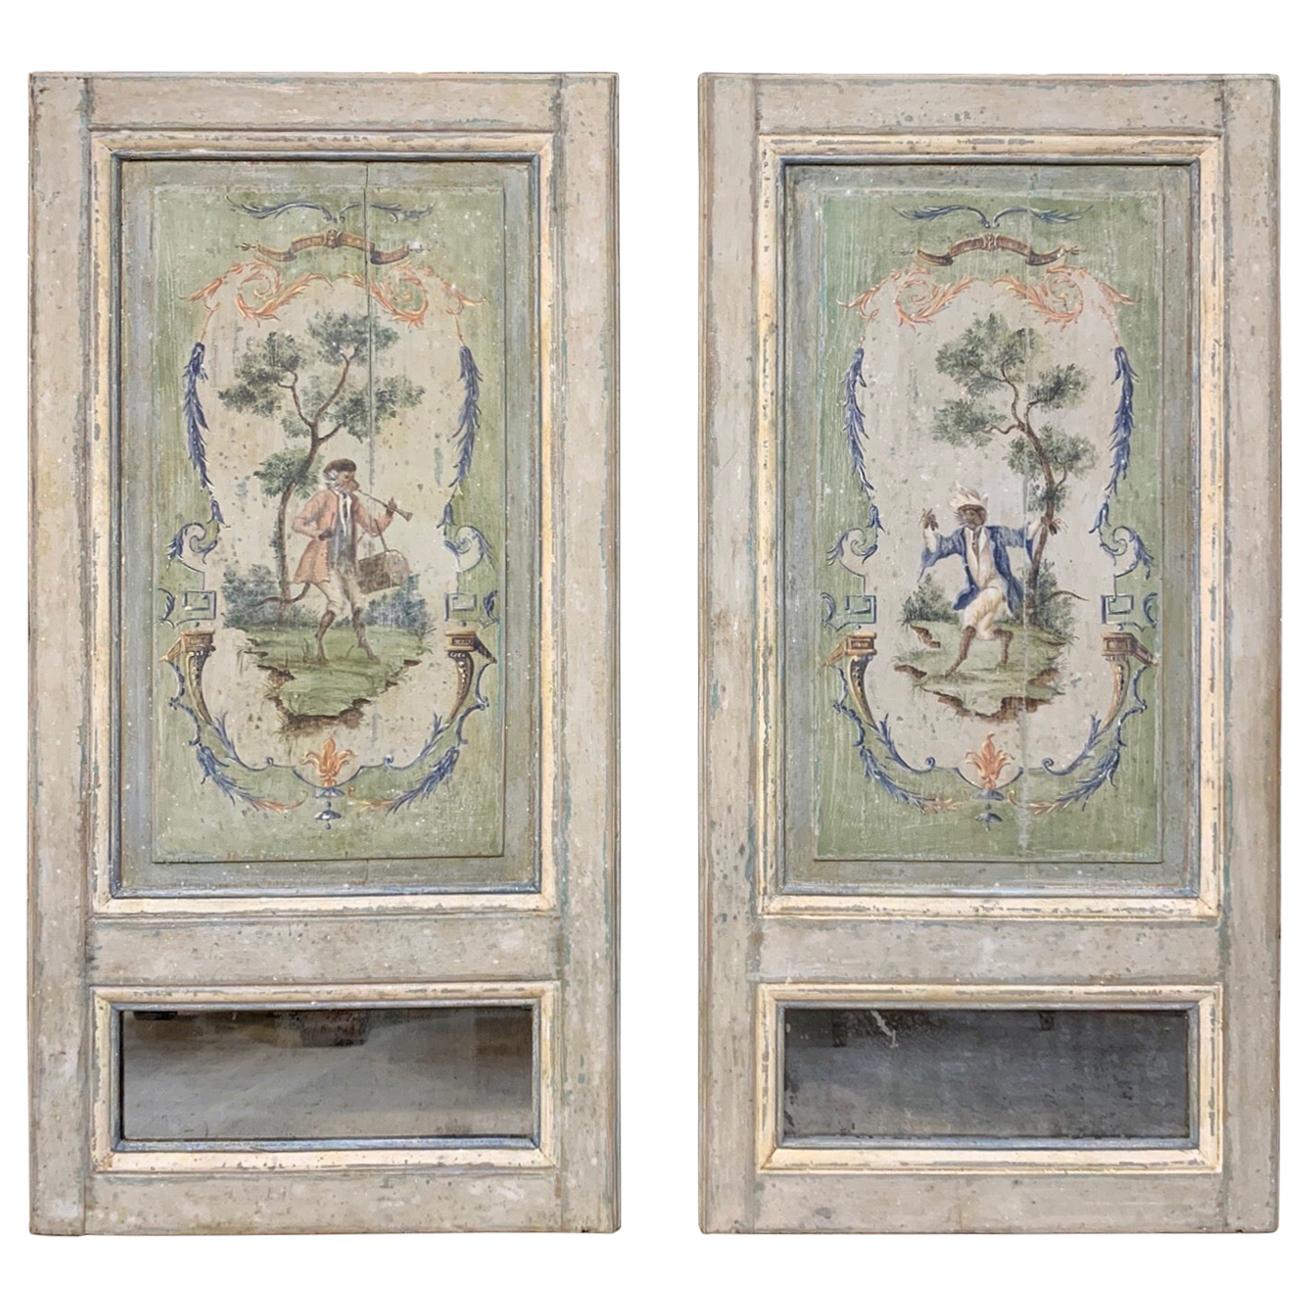 Pair of French 18th Century Trumeau Panels with Monkeys